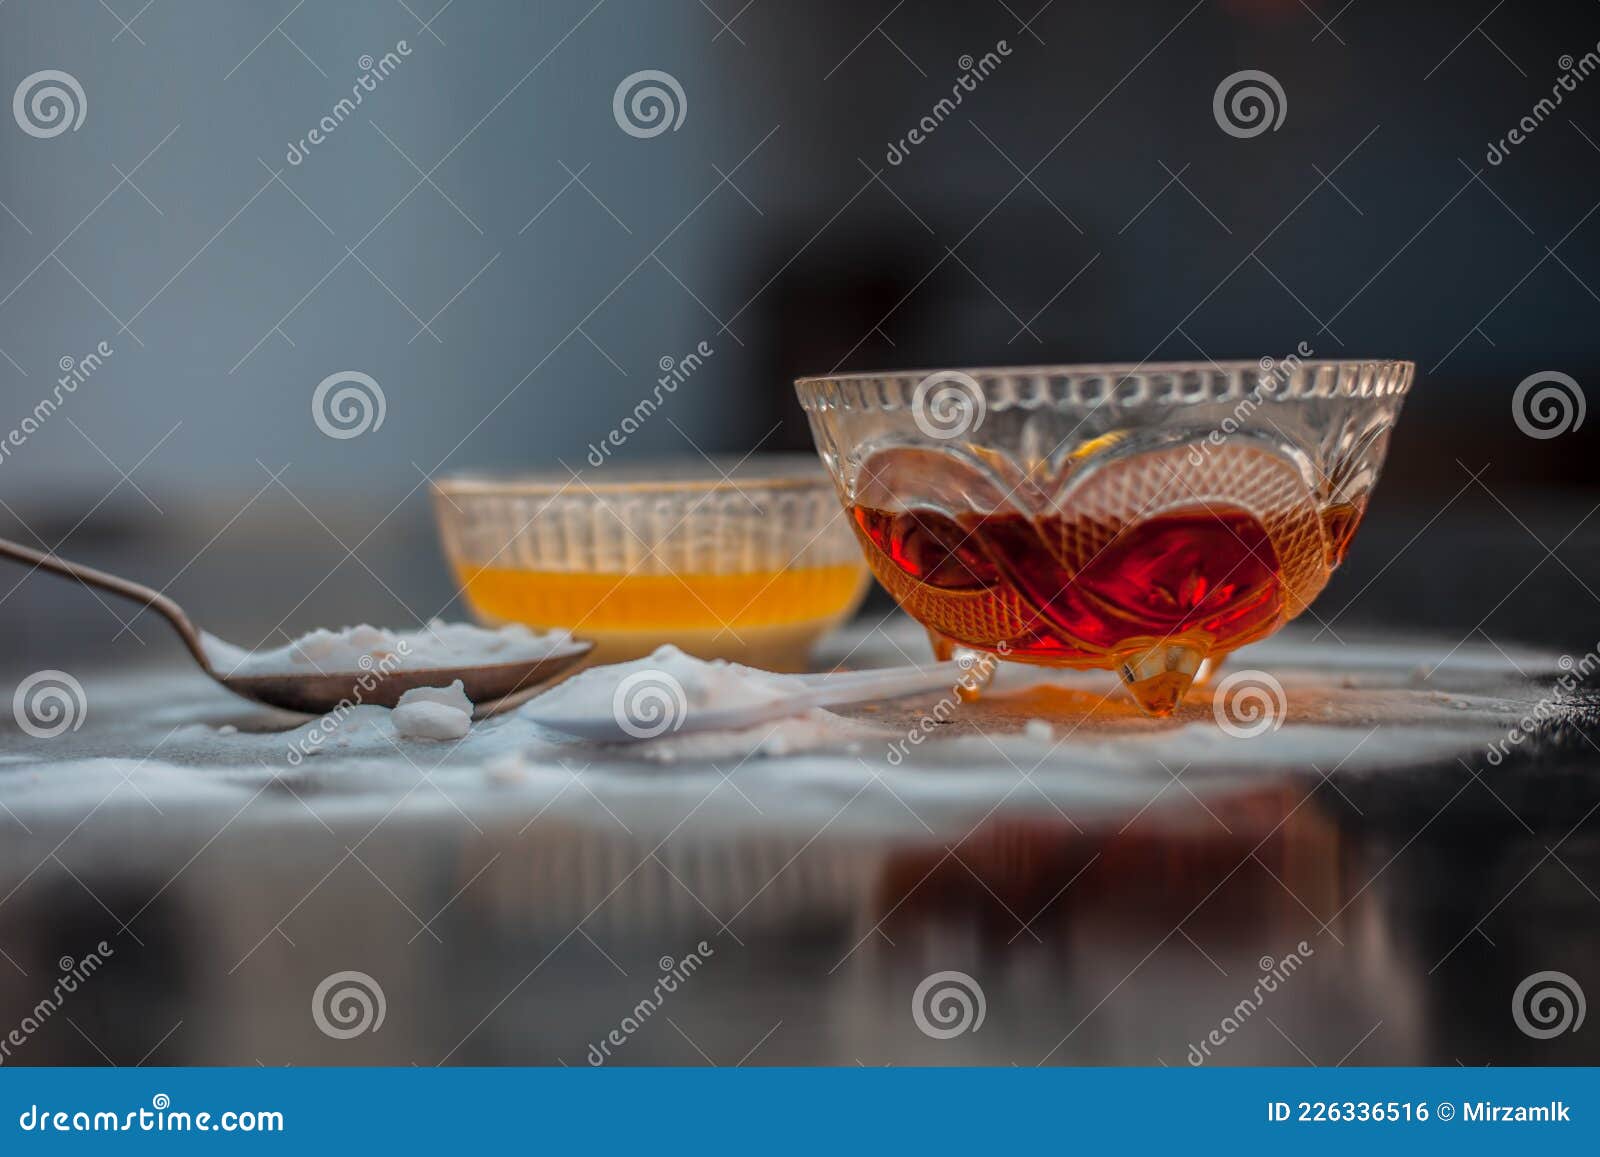 baking soda face mask in a glass bowl on wooden surface along with baking soda powder and honey